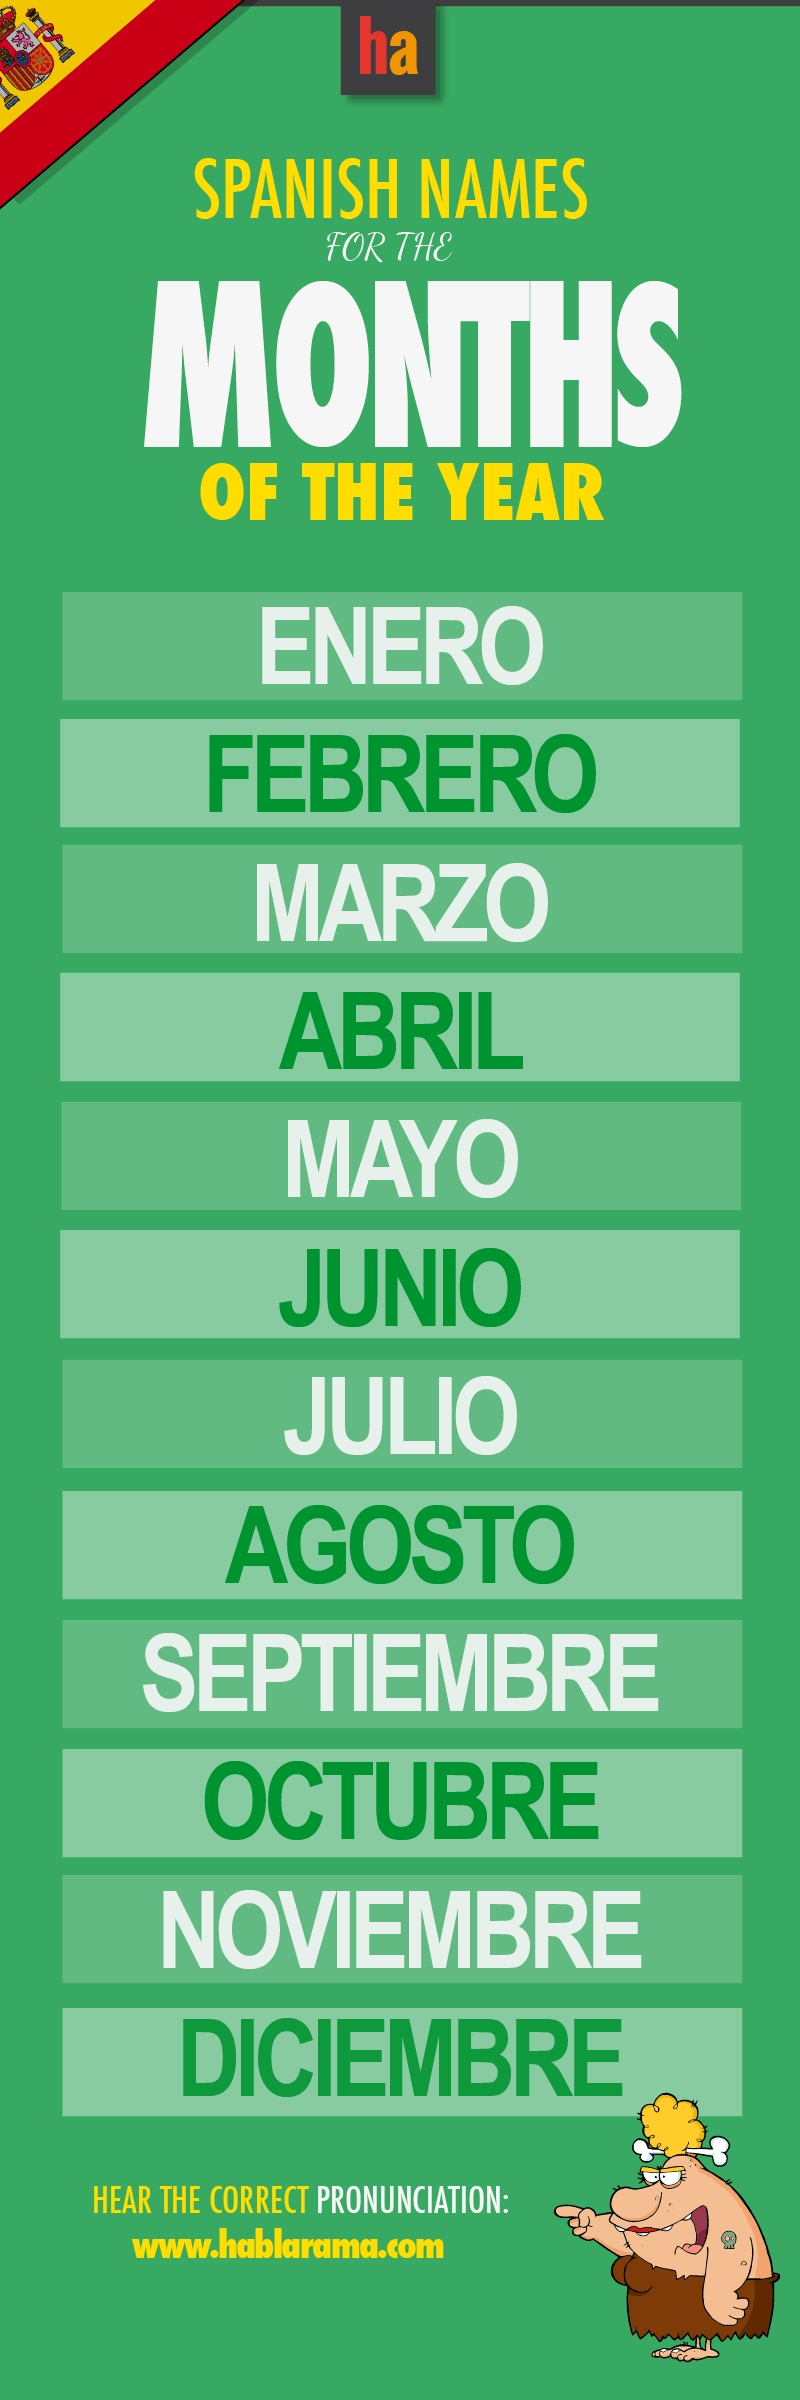 month-names-in-spanish-uno